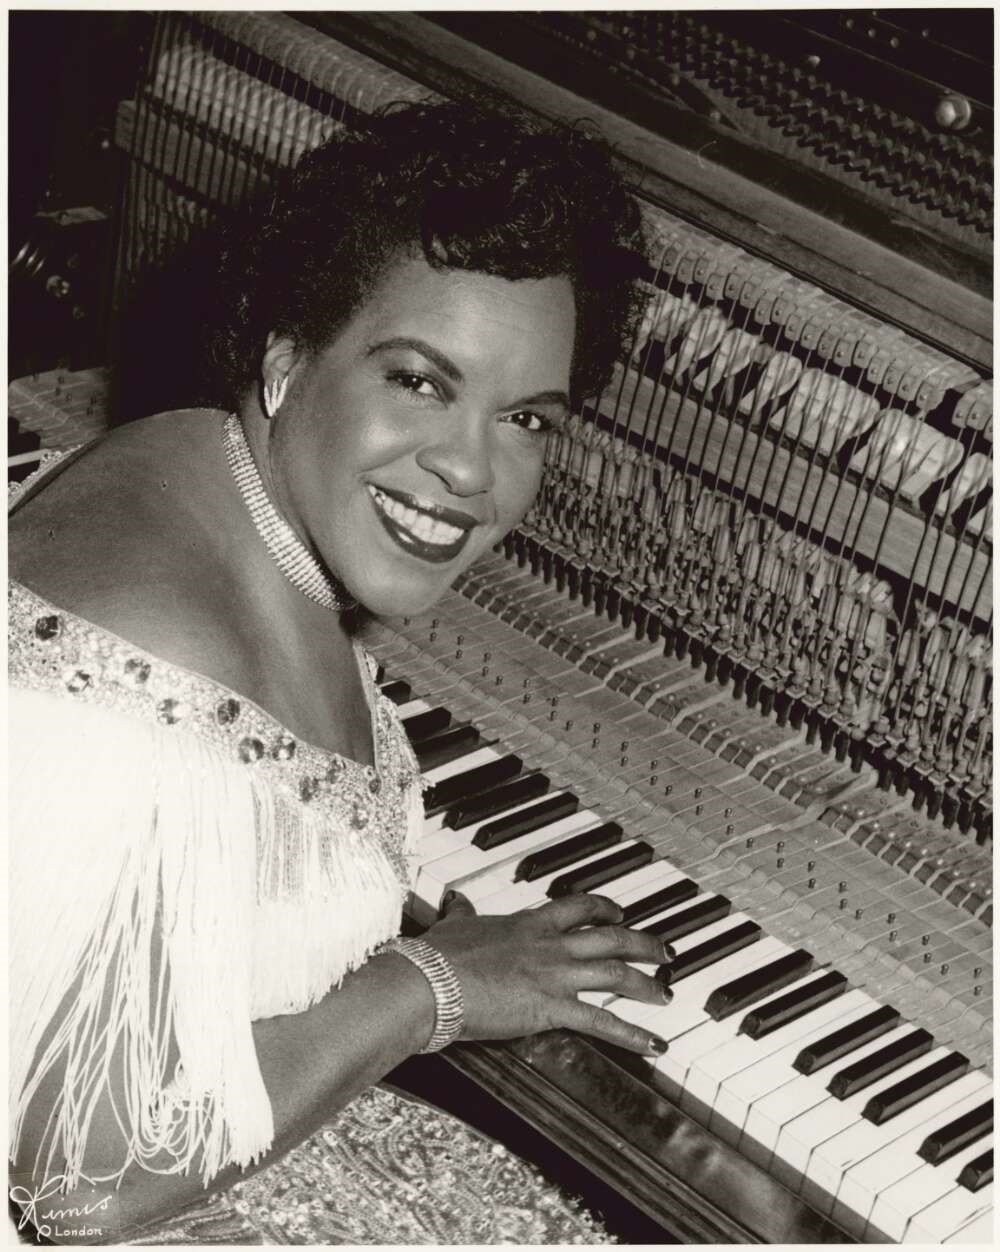 Black and white photograph of a woman over a piano